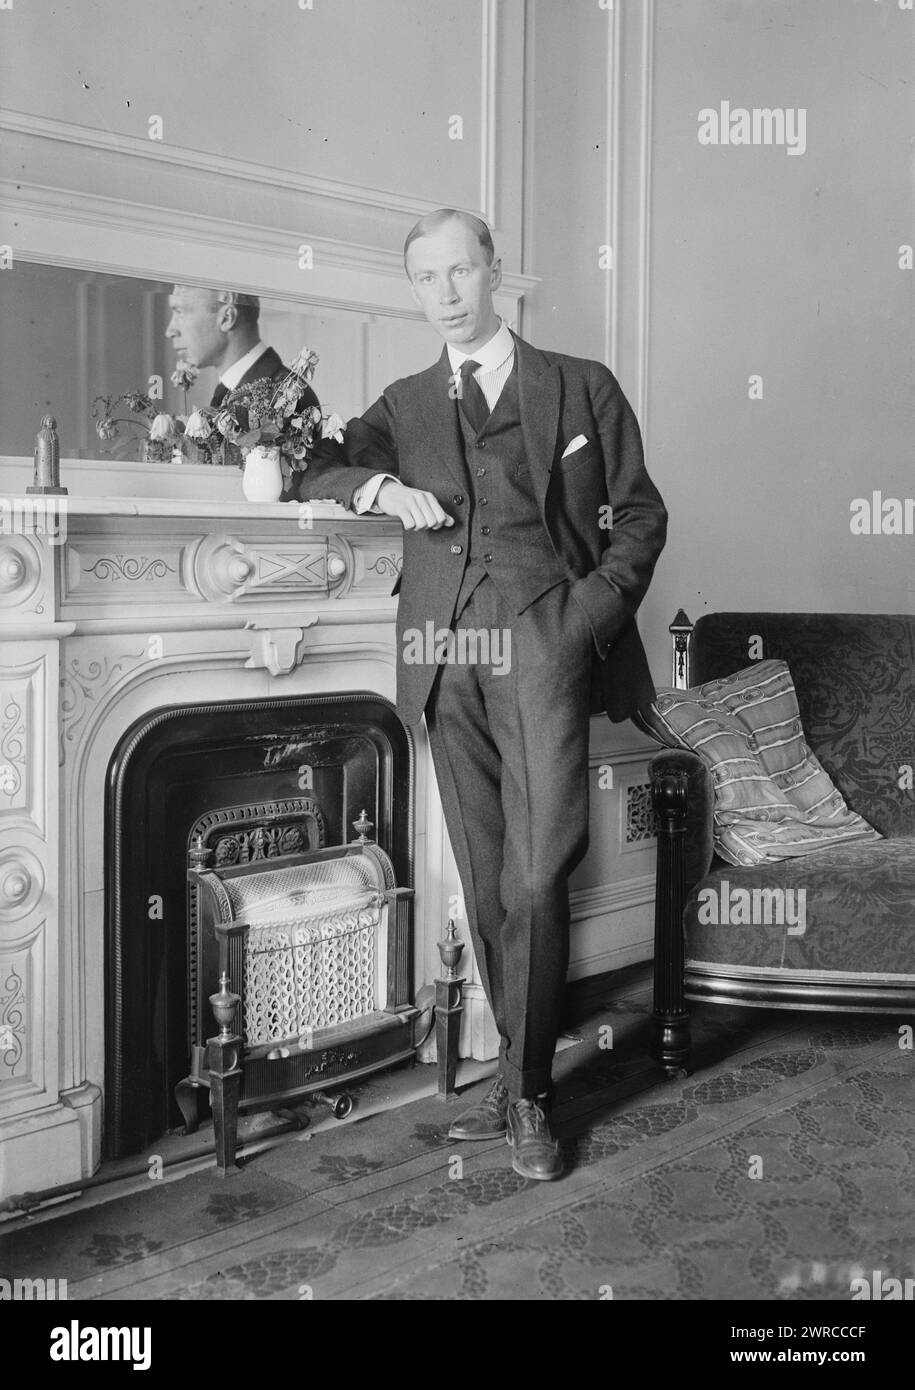 Prokofieff i.e. Prokofiev, Photograph shows Russian composer Sergei Sergeyevich Prokofiev (1891-1953) who lived in the United States between 1918 and 1920., between 1918 and 1920, Glass negatives, 1 negative: glass Stock Photo